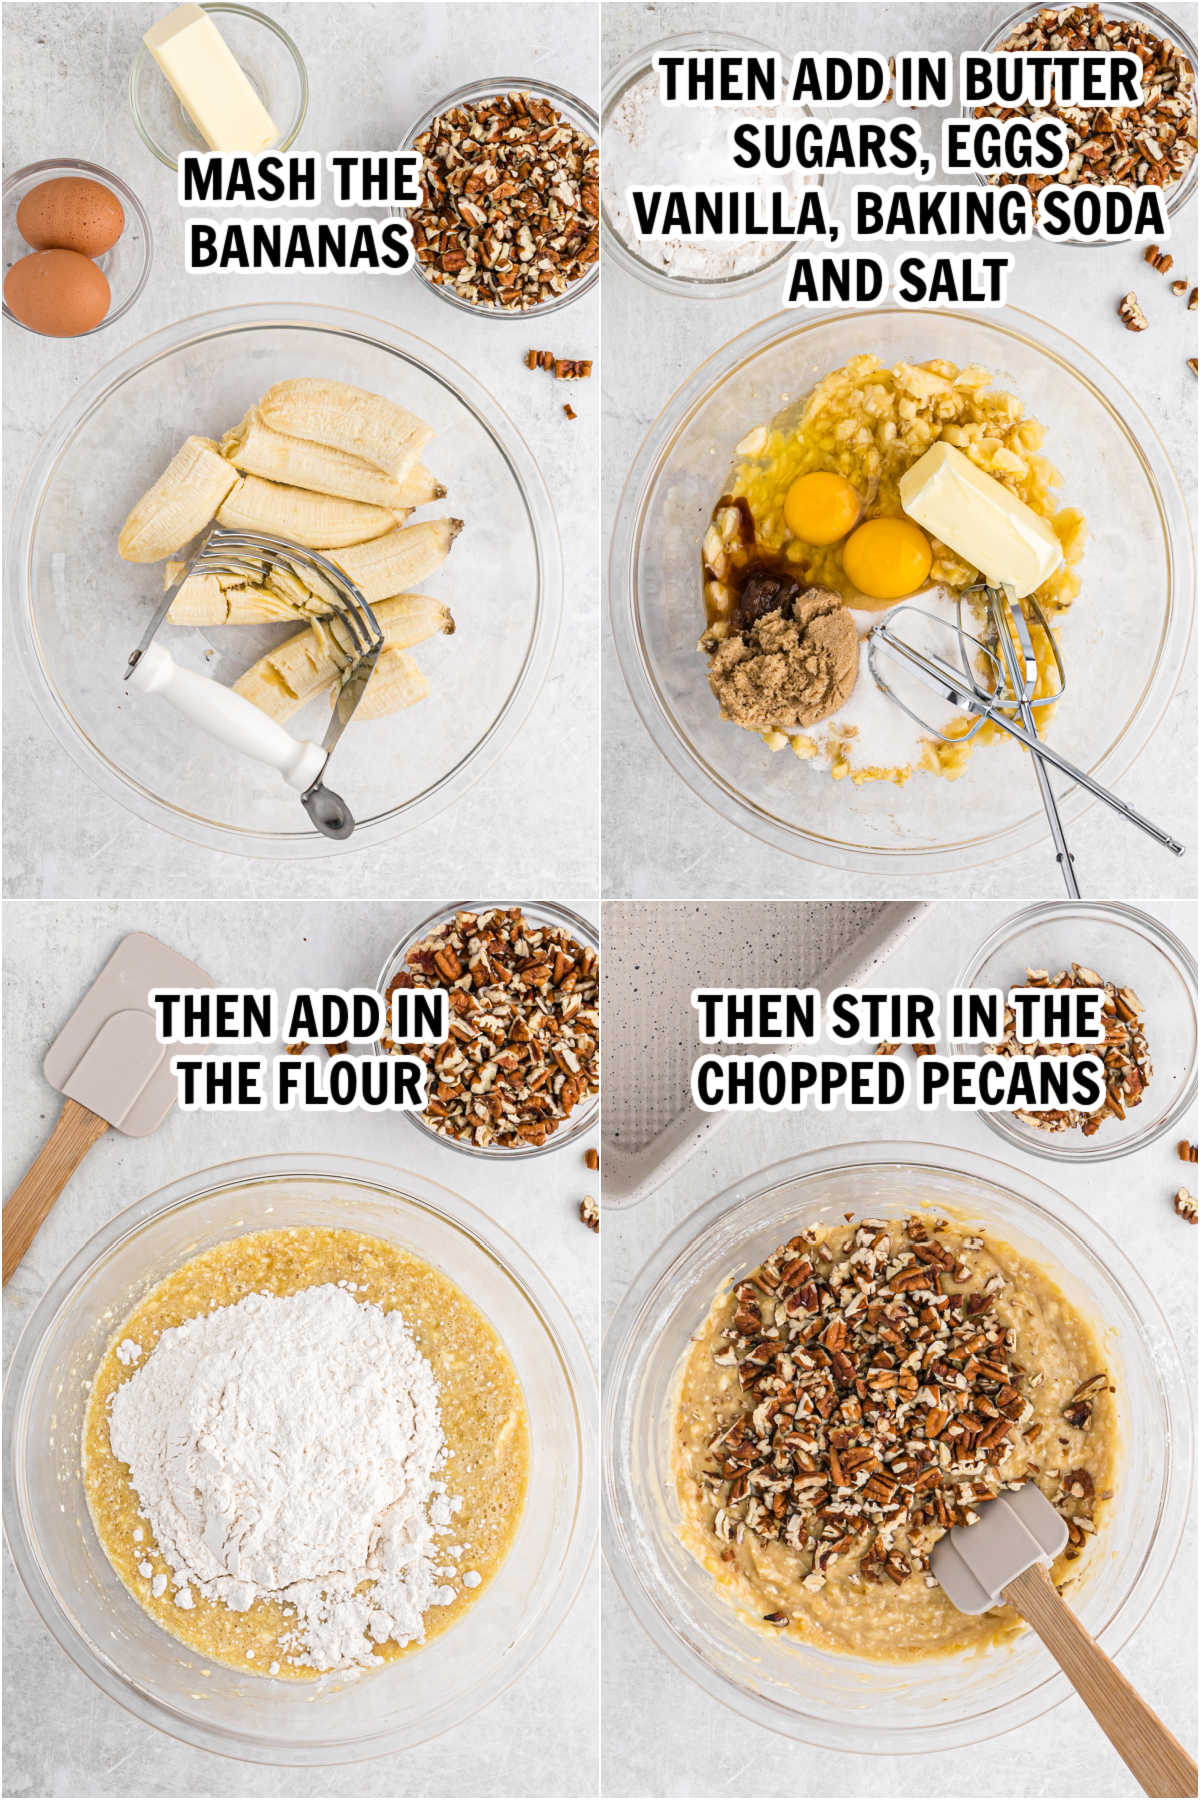 The process of mixing the banana bread ingredients